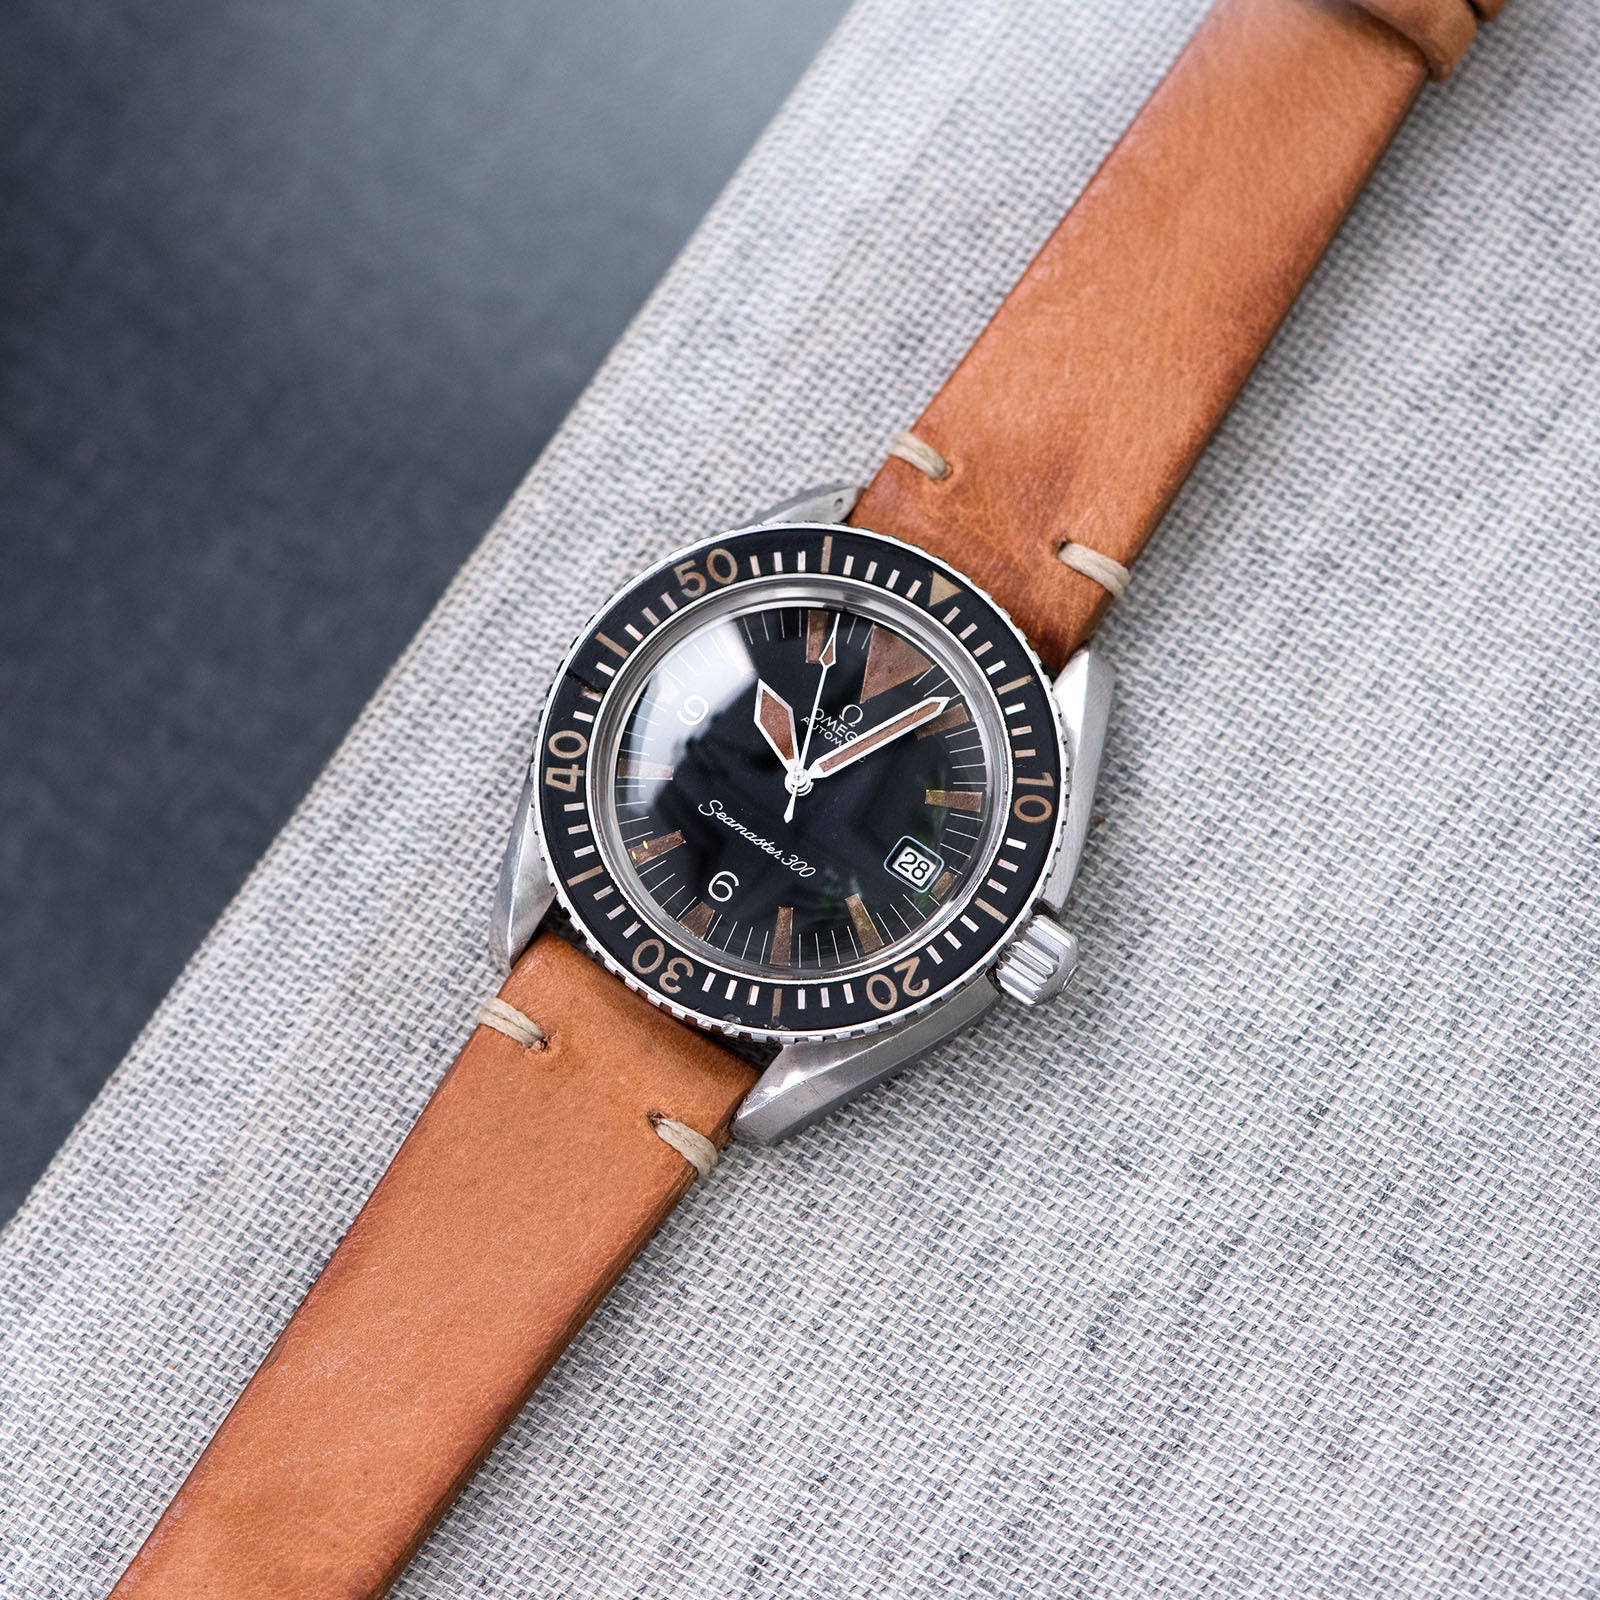 Bulang and Sons_Strap Guide_The omega SM 300 Seamaster_Caramel Brown Leather Watch Strap